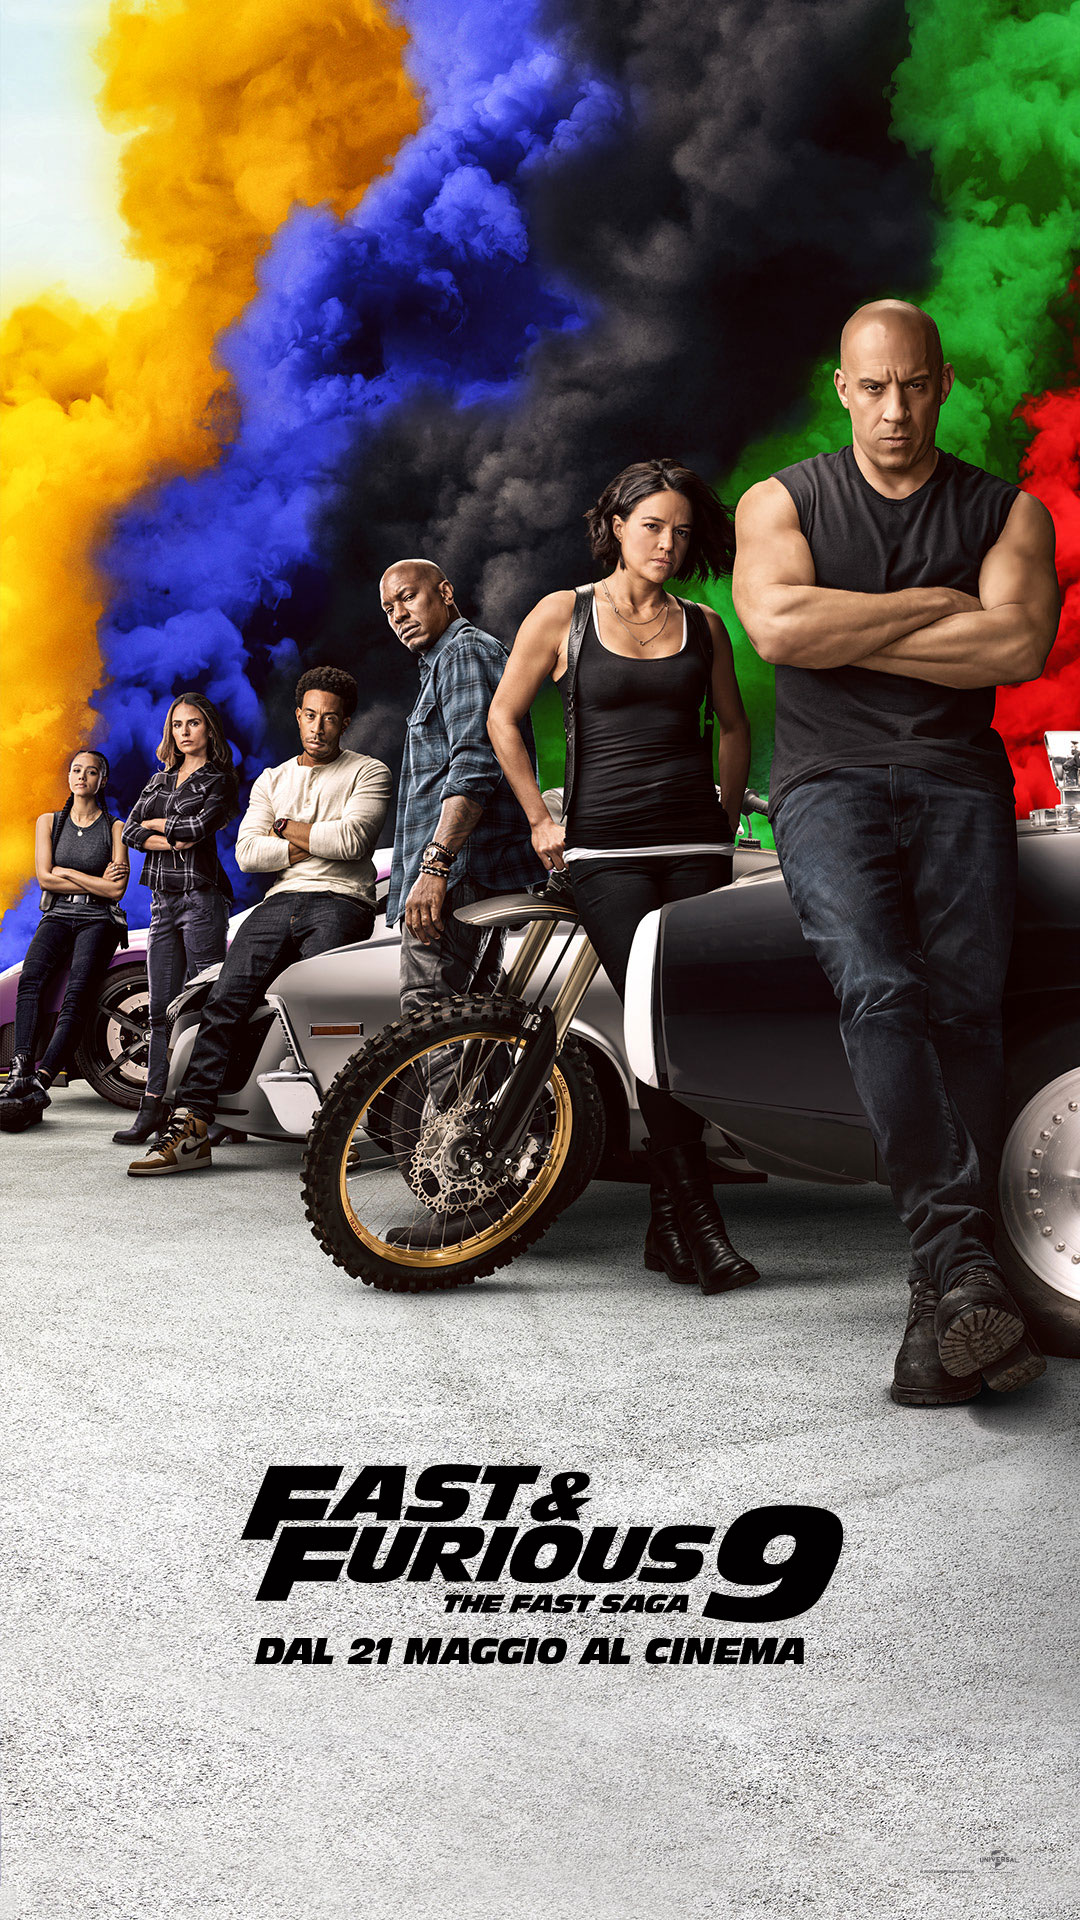 Group Poster italiano di Fast and Furious 9